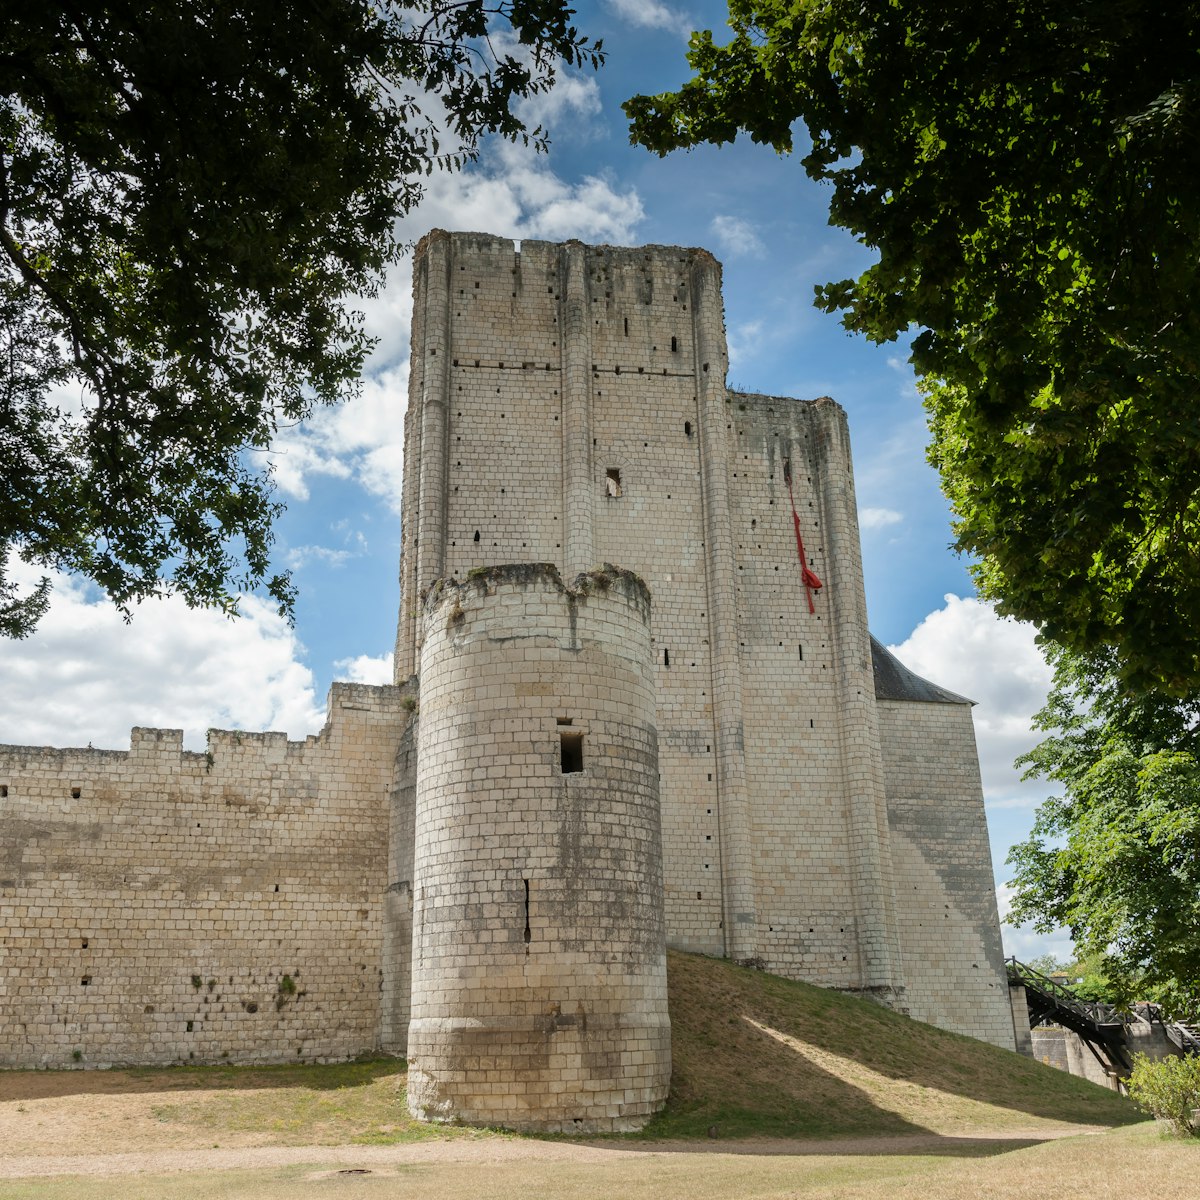 Medieval Donjon Tower of the castle in Loches, France.